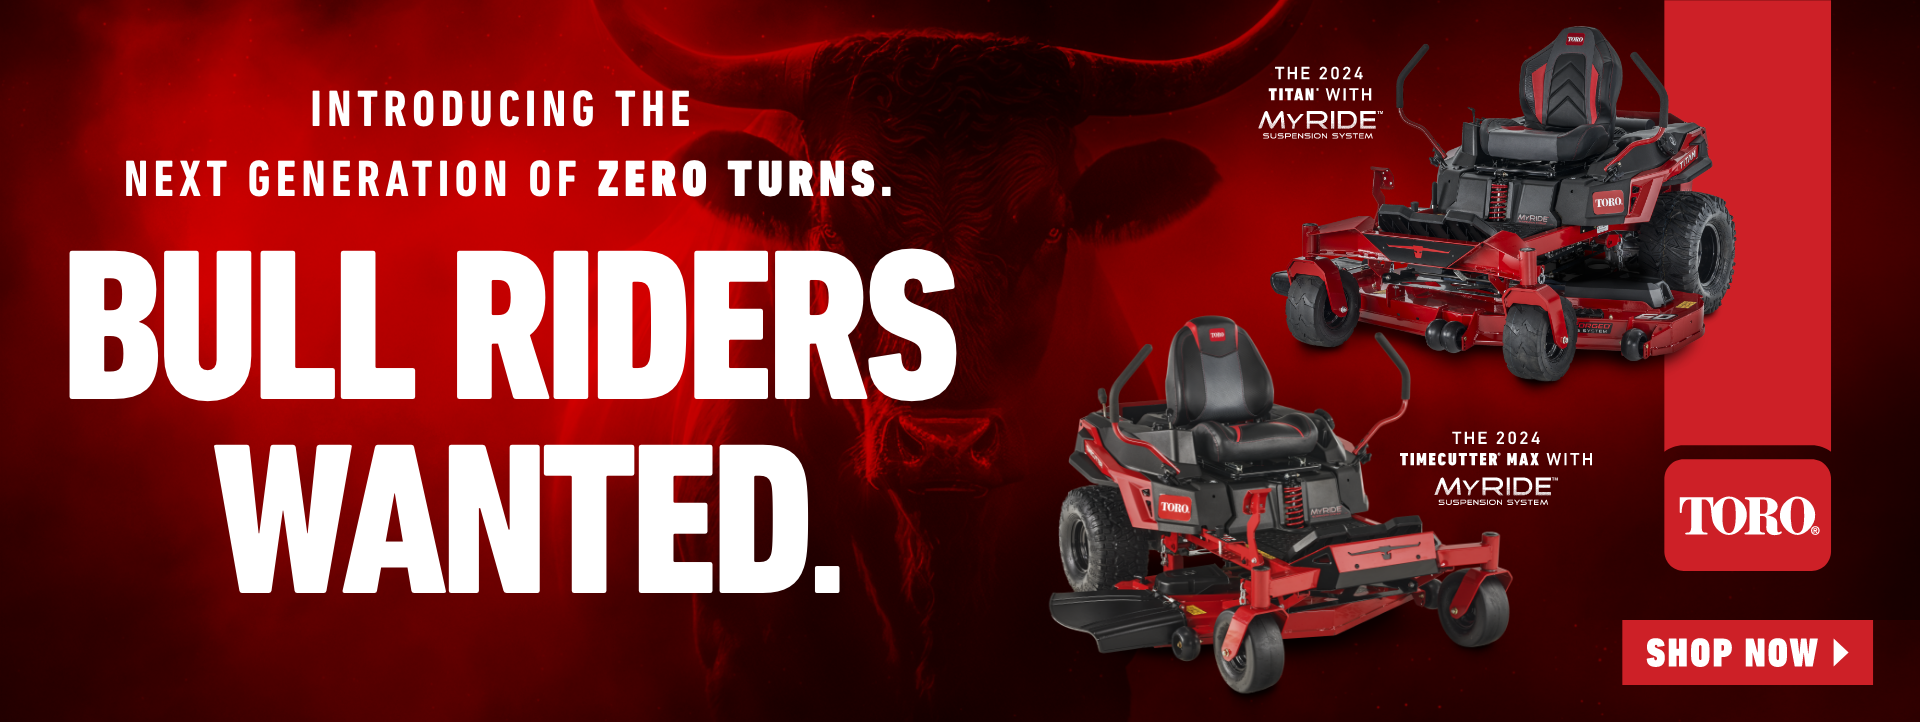 Introducing the Next Generation of Zero Turns. Bull Riders Wanted.